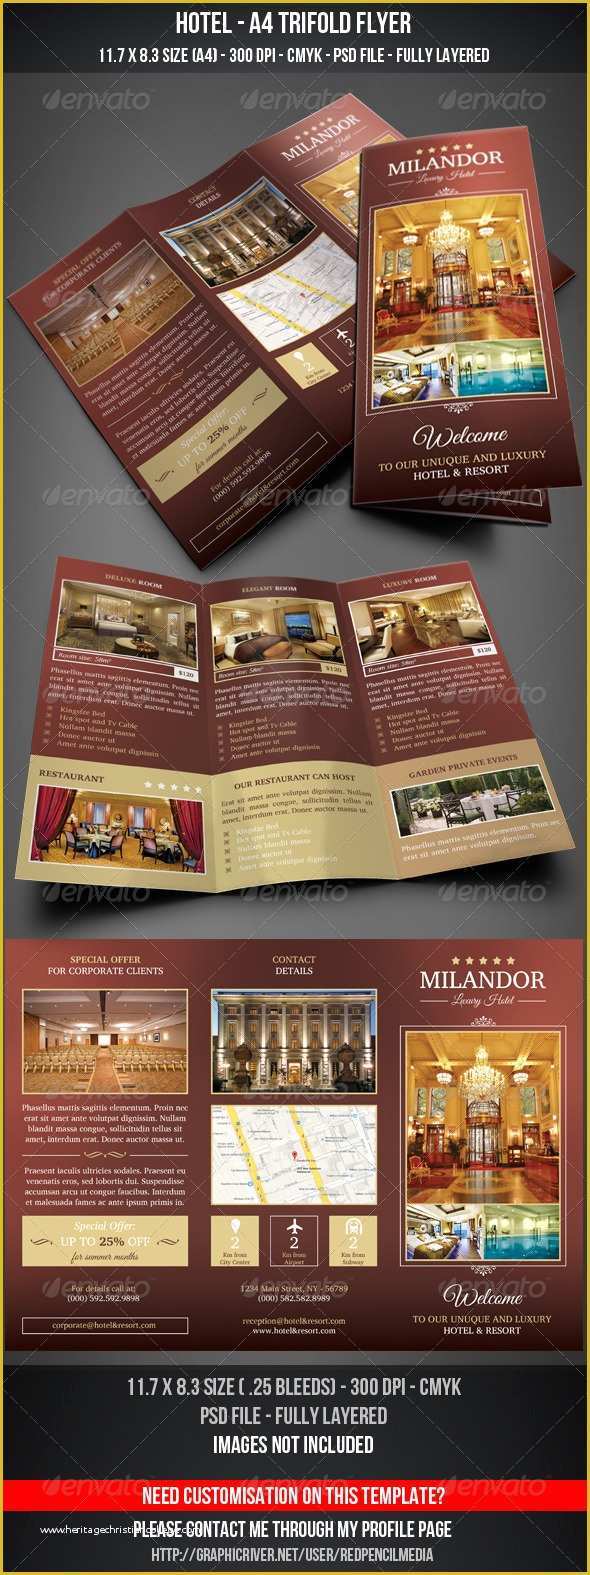 Hotel Brochure Templates Free Download Of Hotel A4 Trifold Flyer by Redpencilmedia